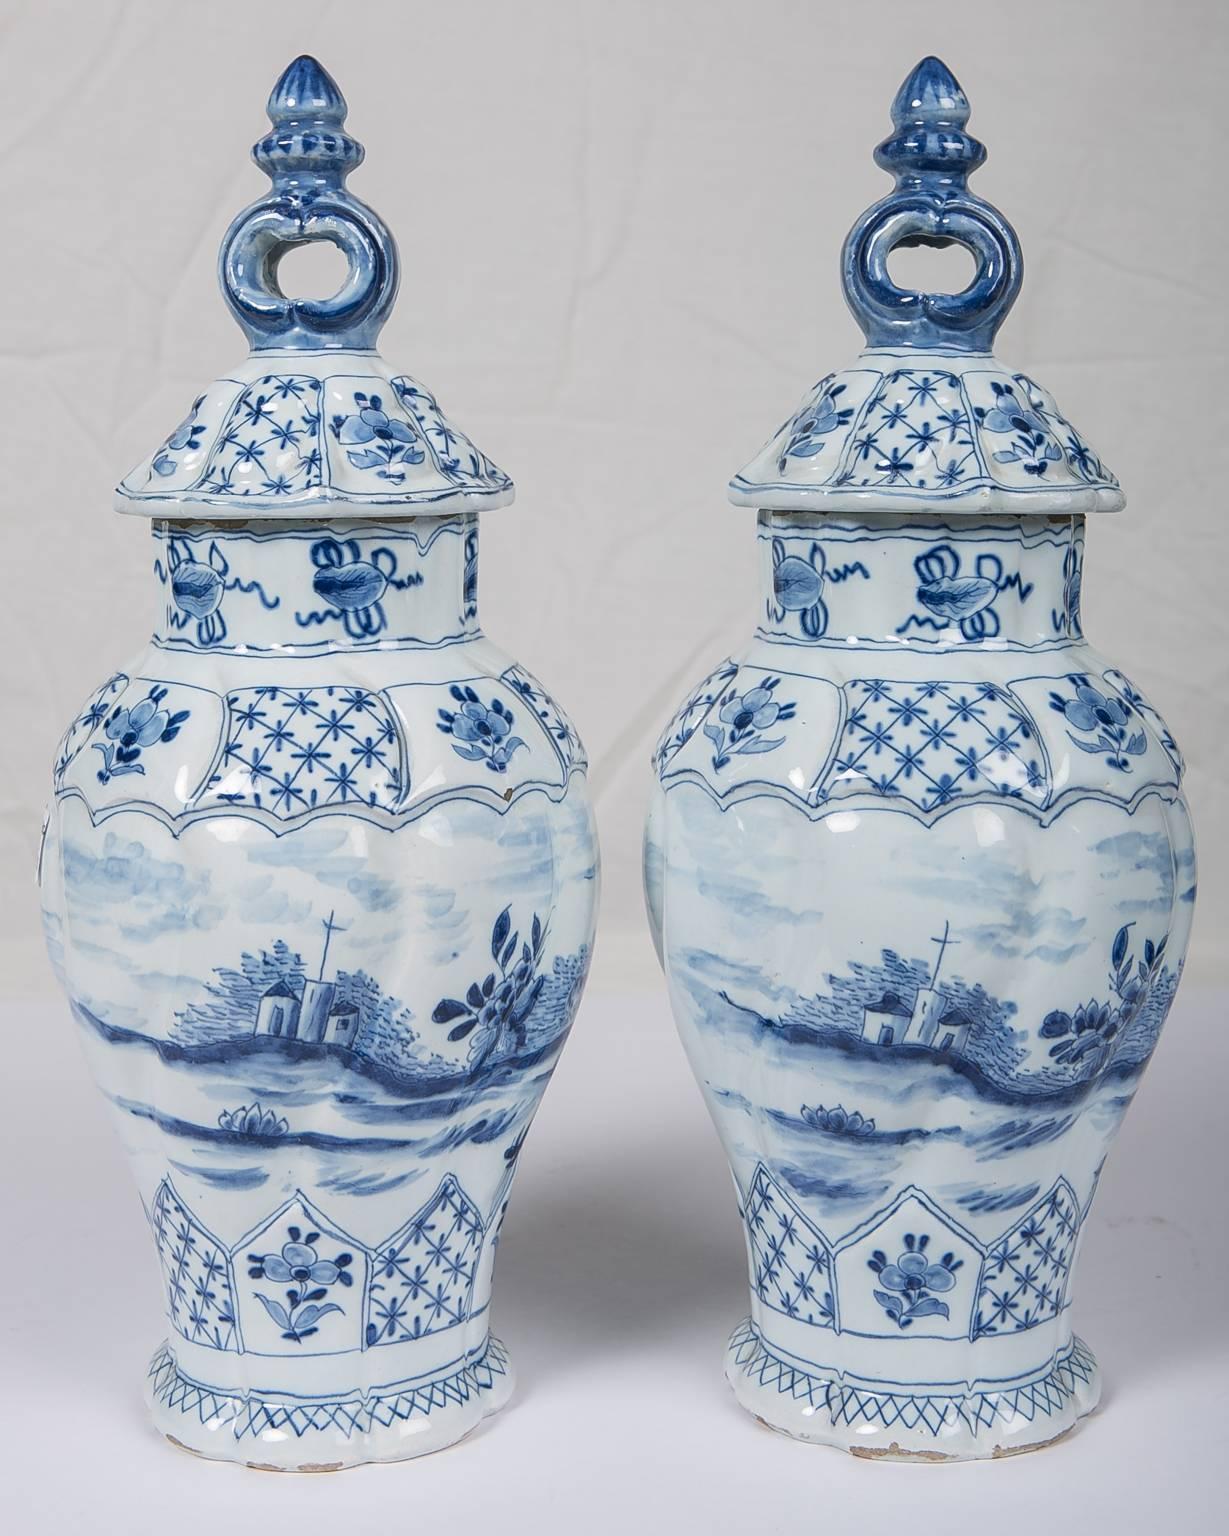 An attractive pair of blue and white Dutch delft covered vases painted in the softest pale blue. What make these vases special is the size (12